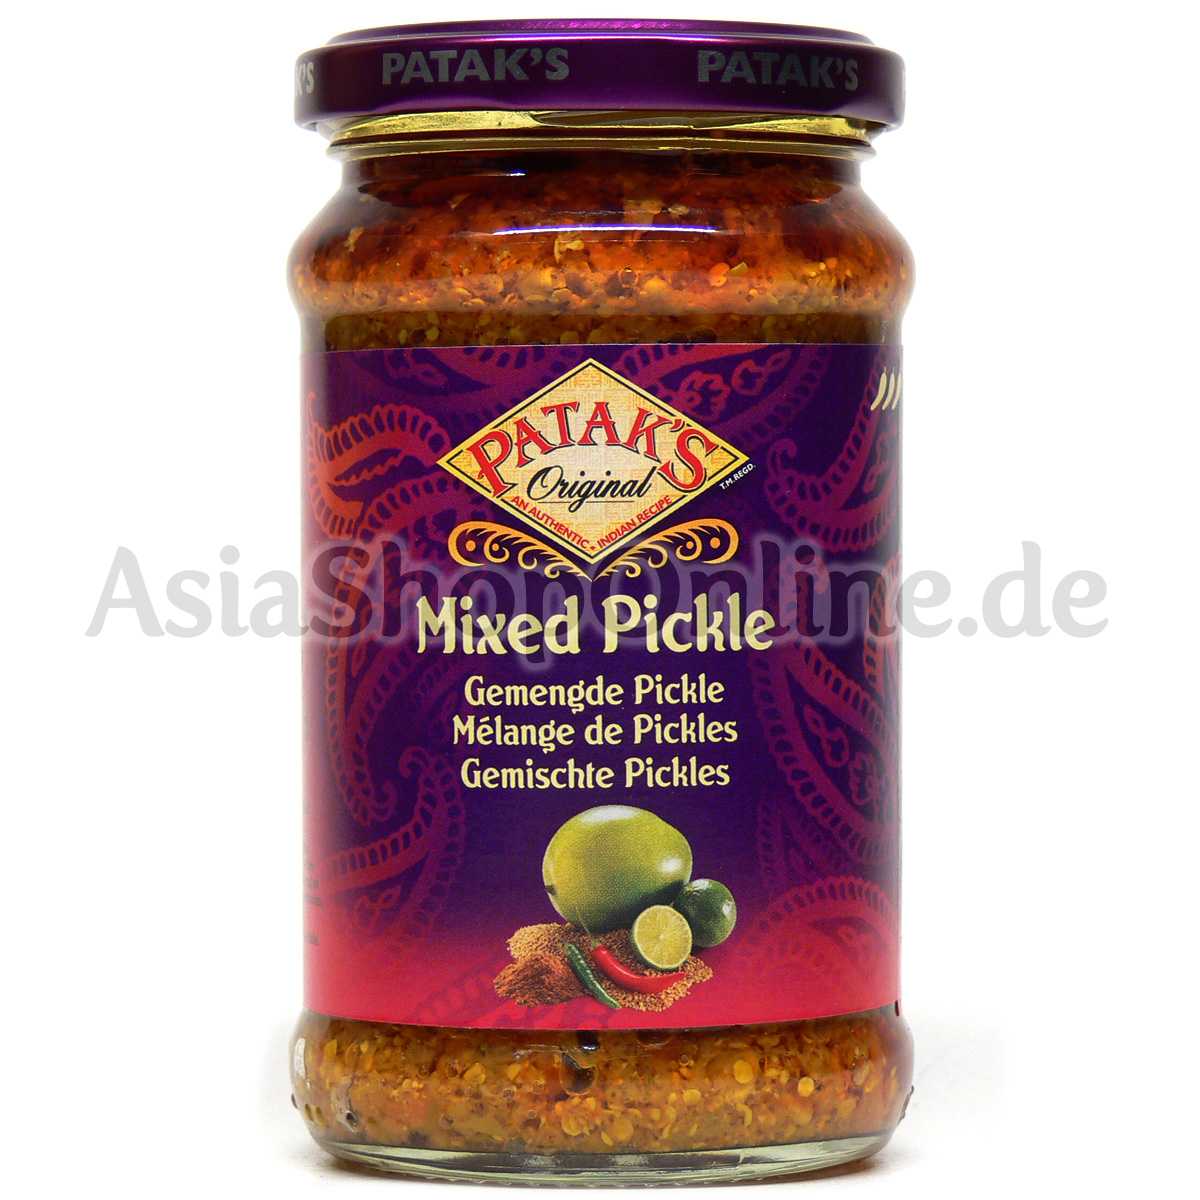 Mixed Pickle - Pataks - 283g